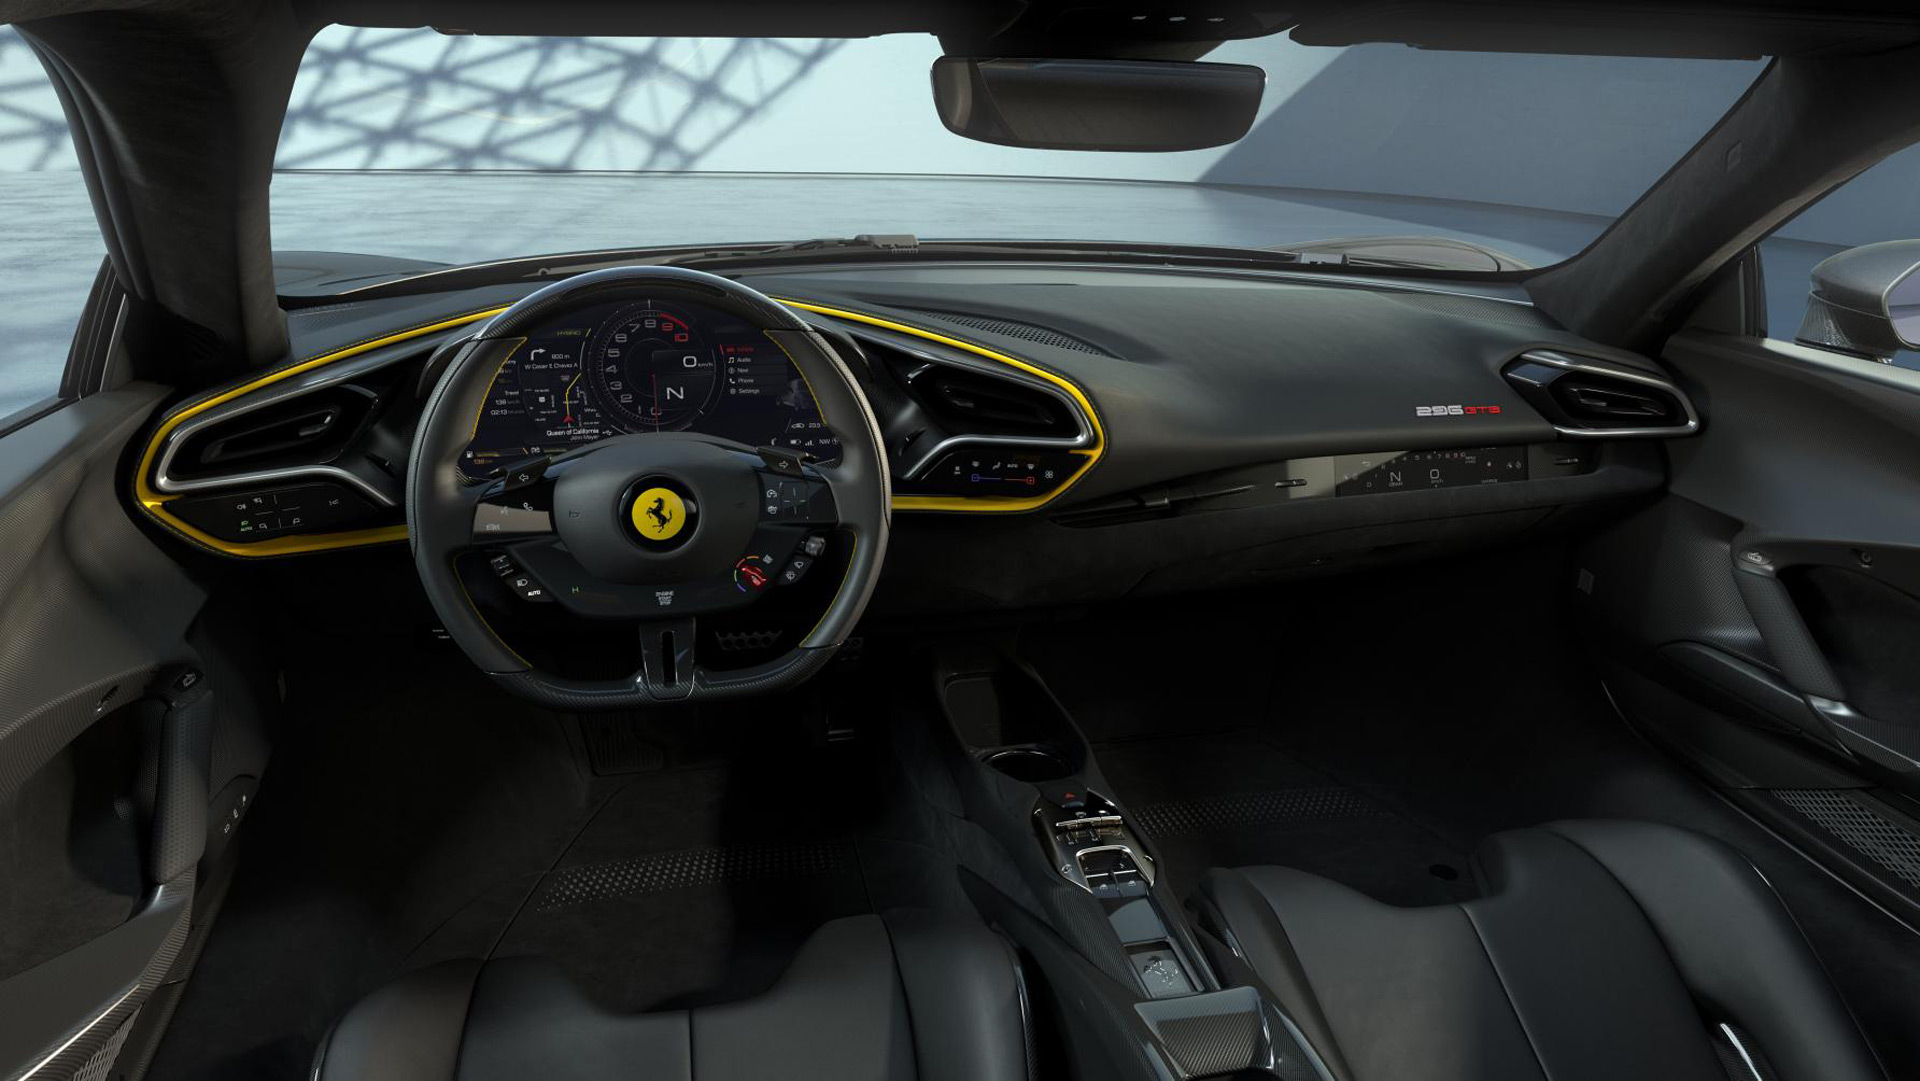 Ferrari patents air conditioning system that can detect body temperature